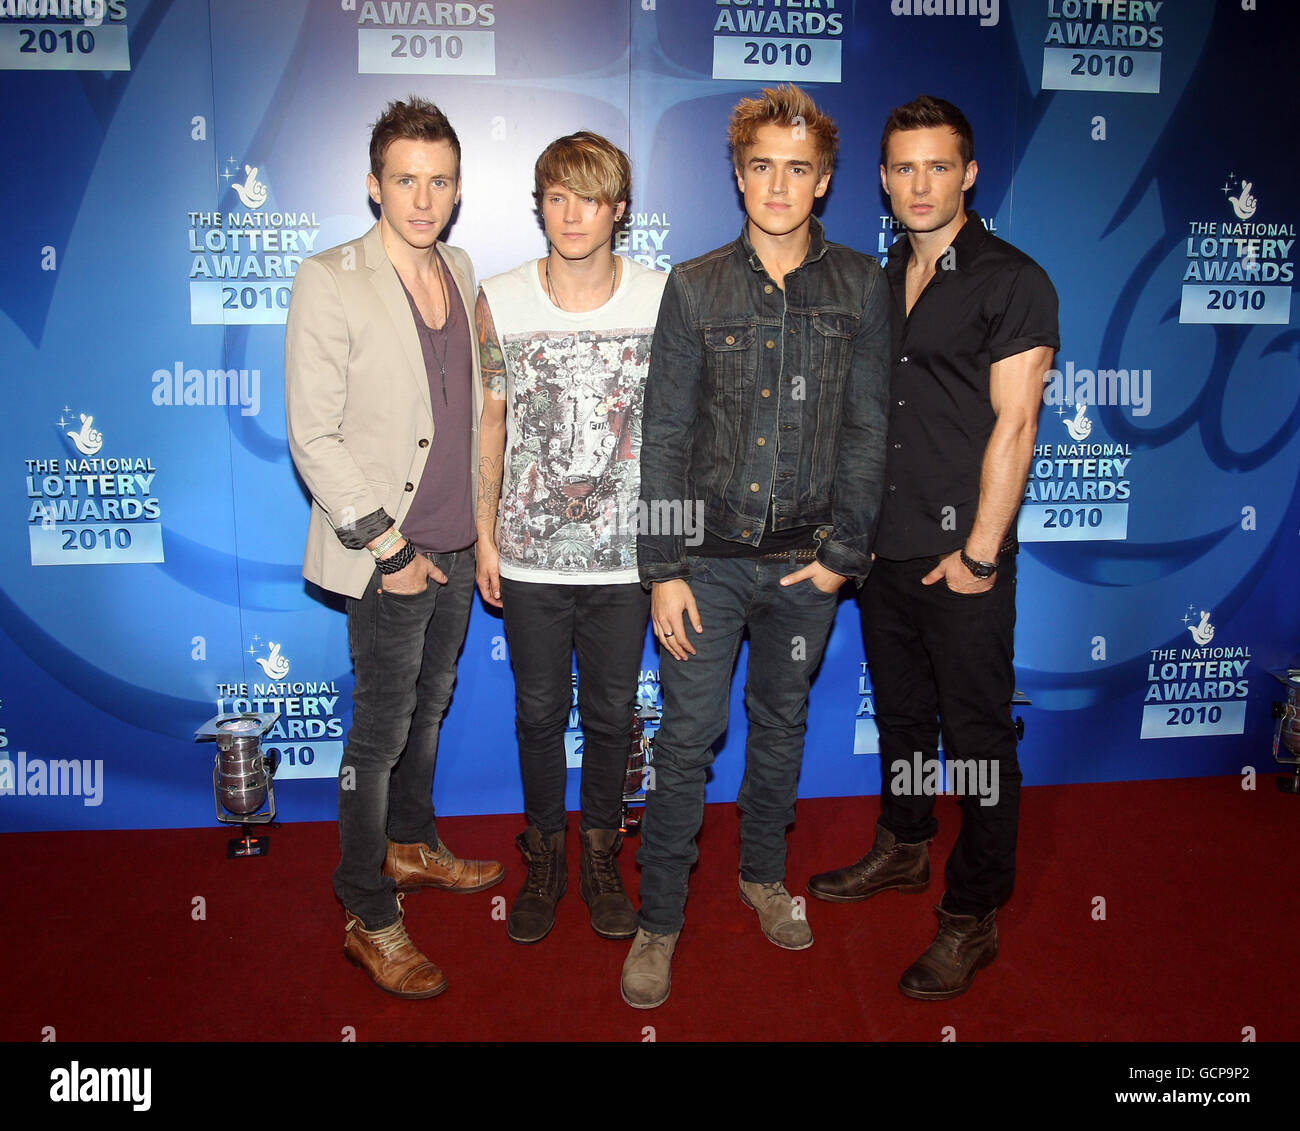 Mcfly (from left to right) Danny Jones,Dougie Poynter,Tom Fletcher and Harry Judd attend the National Lottery Awards at the Roundhouse in central London. Stock Photo